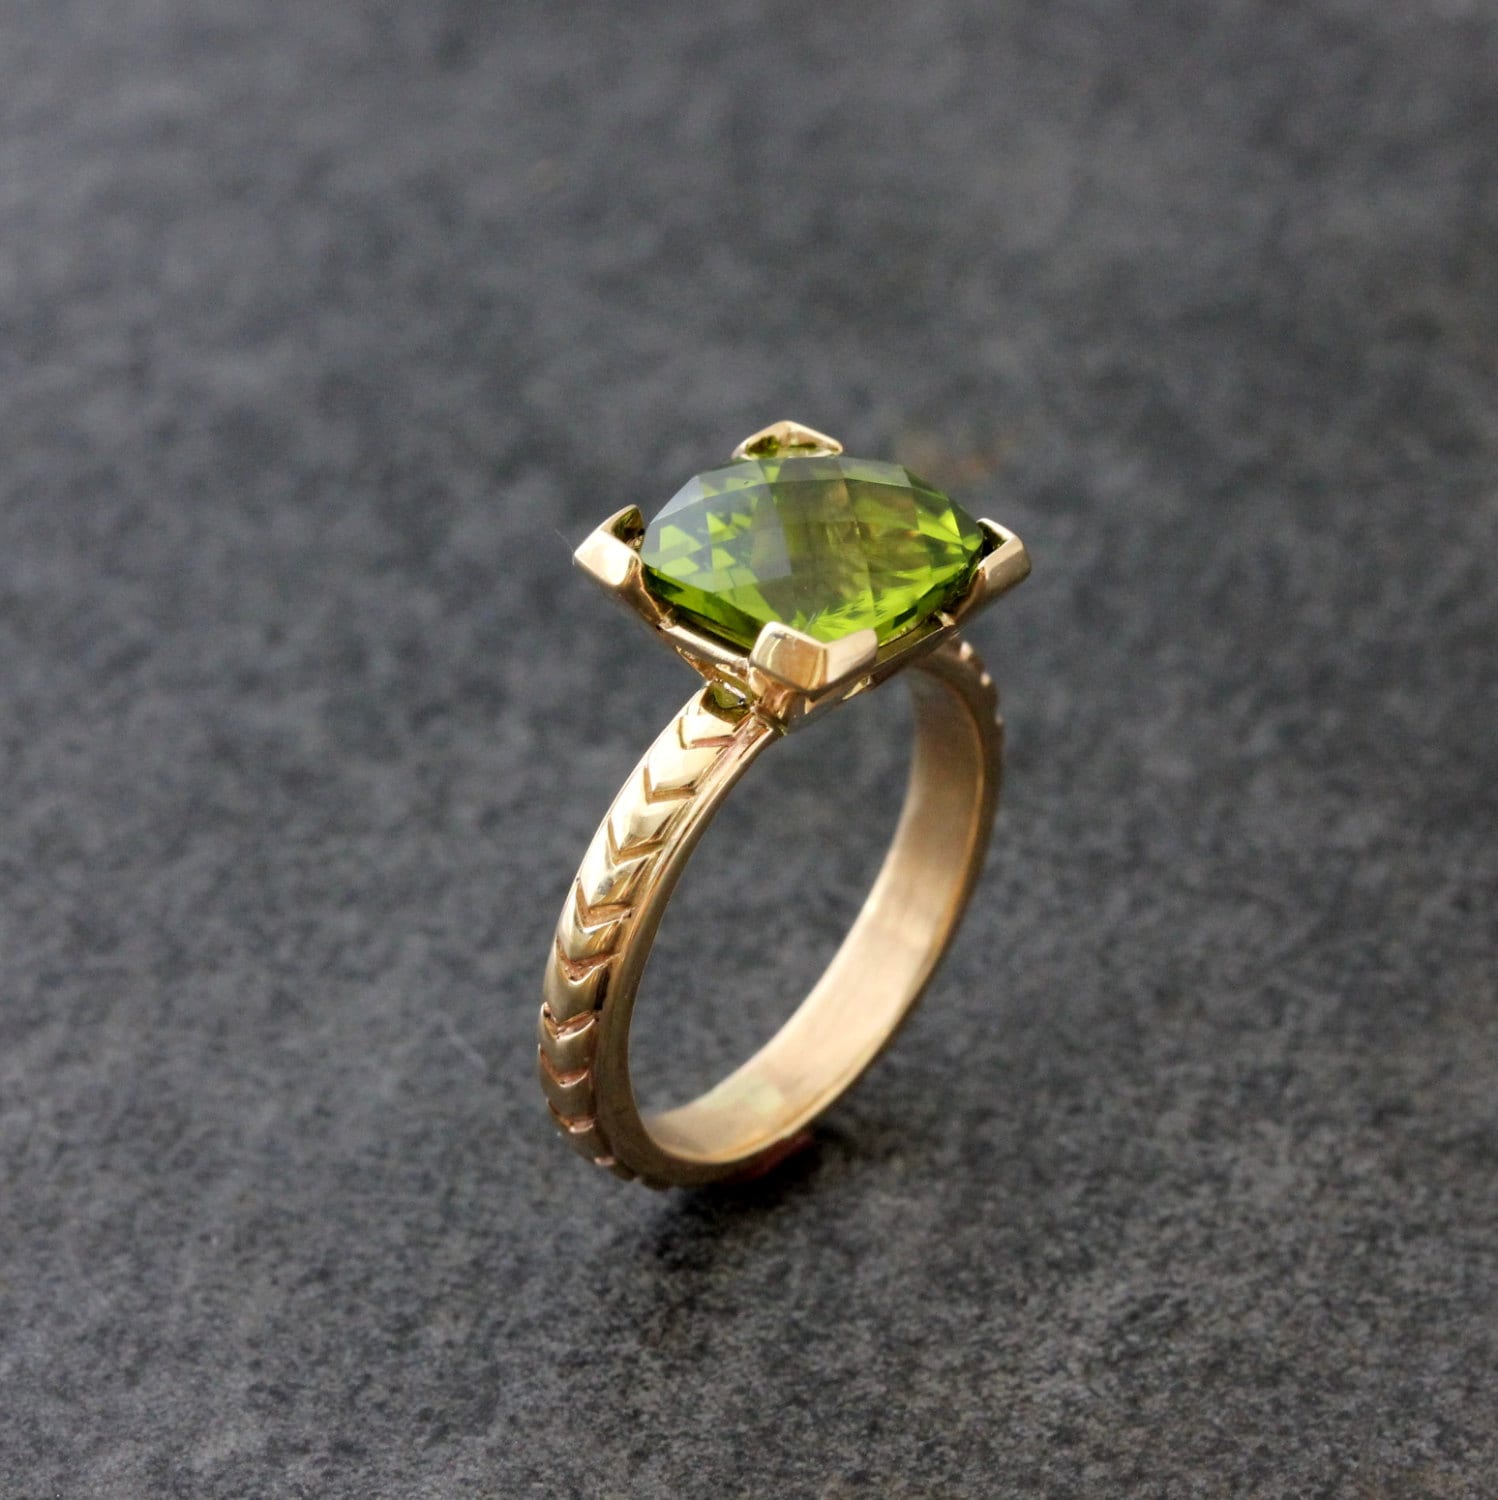 A Handmade Cushion Cut Peridot Yellow Gold Ring by Cassin Jewelry.